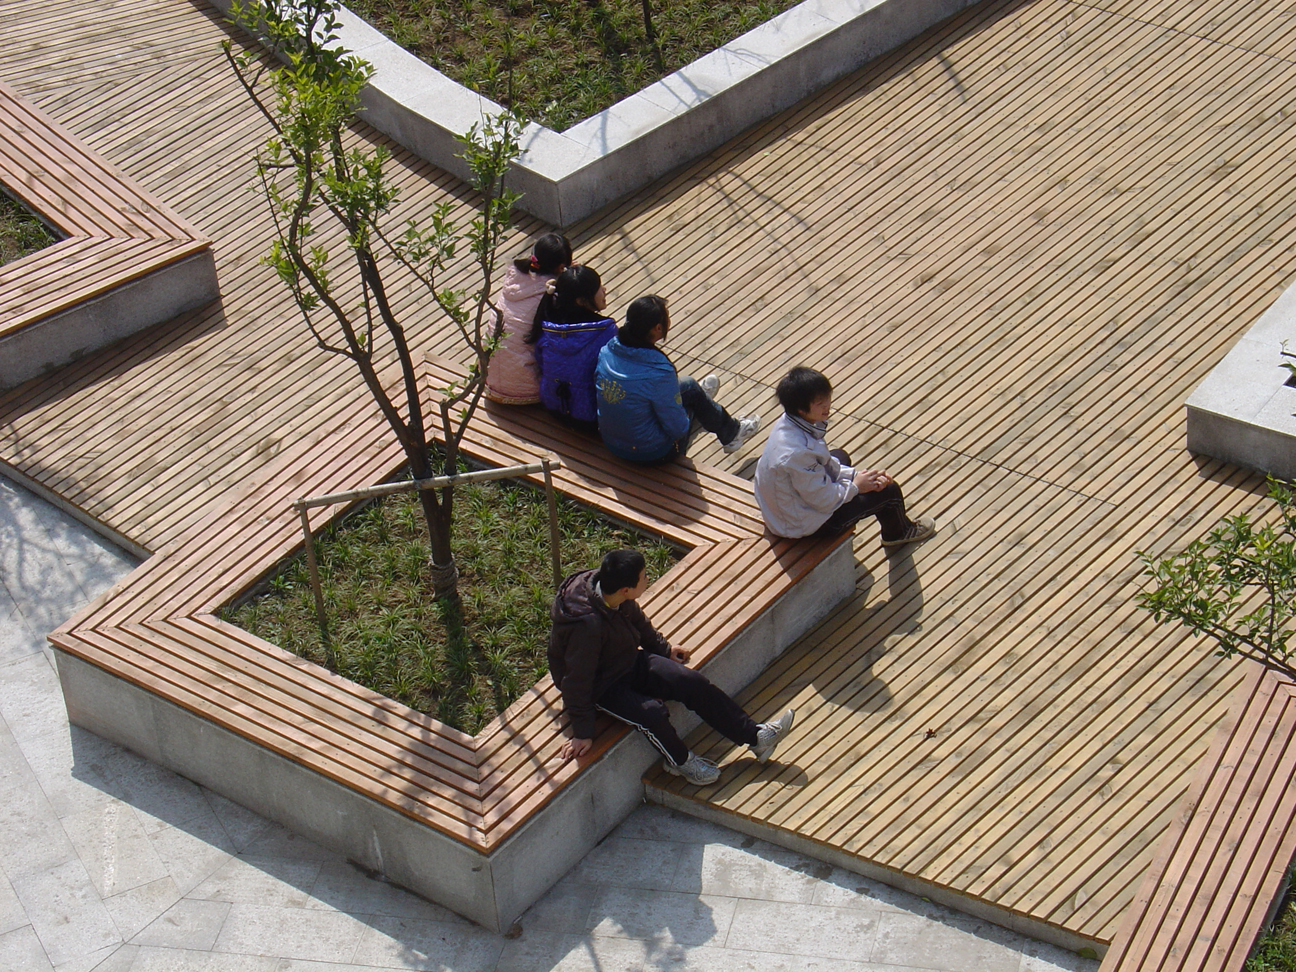 Students resting in the sun